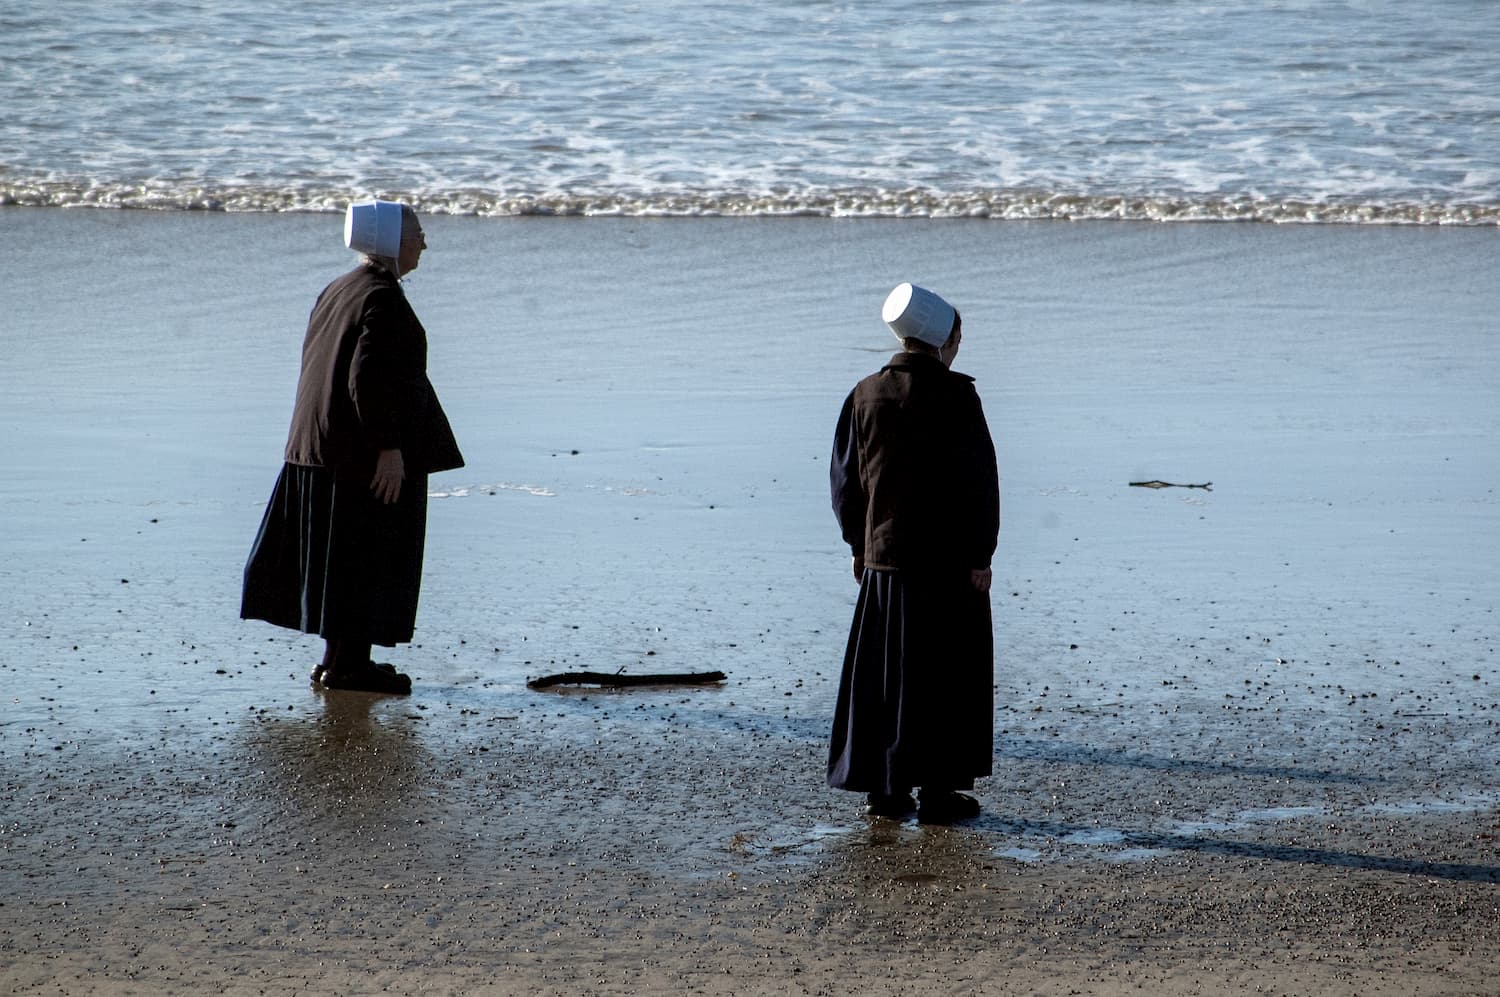 Photograph by Tish Lampert showing two Nuns standing on the beach